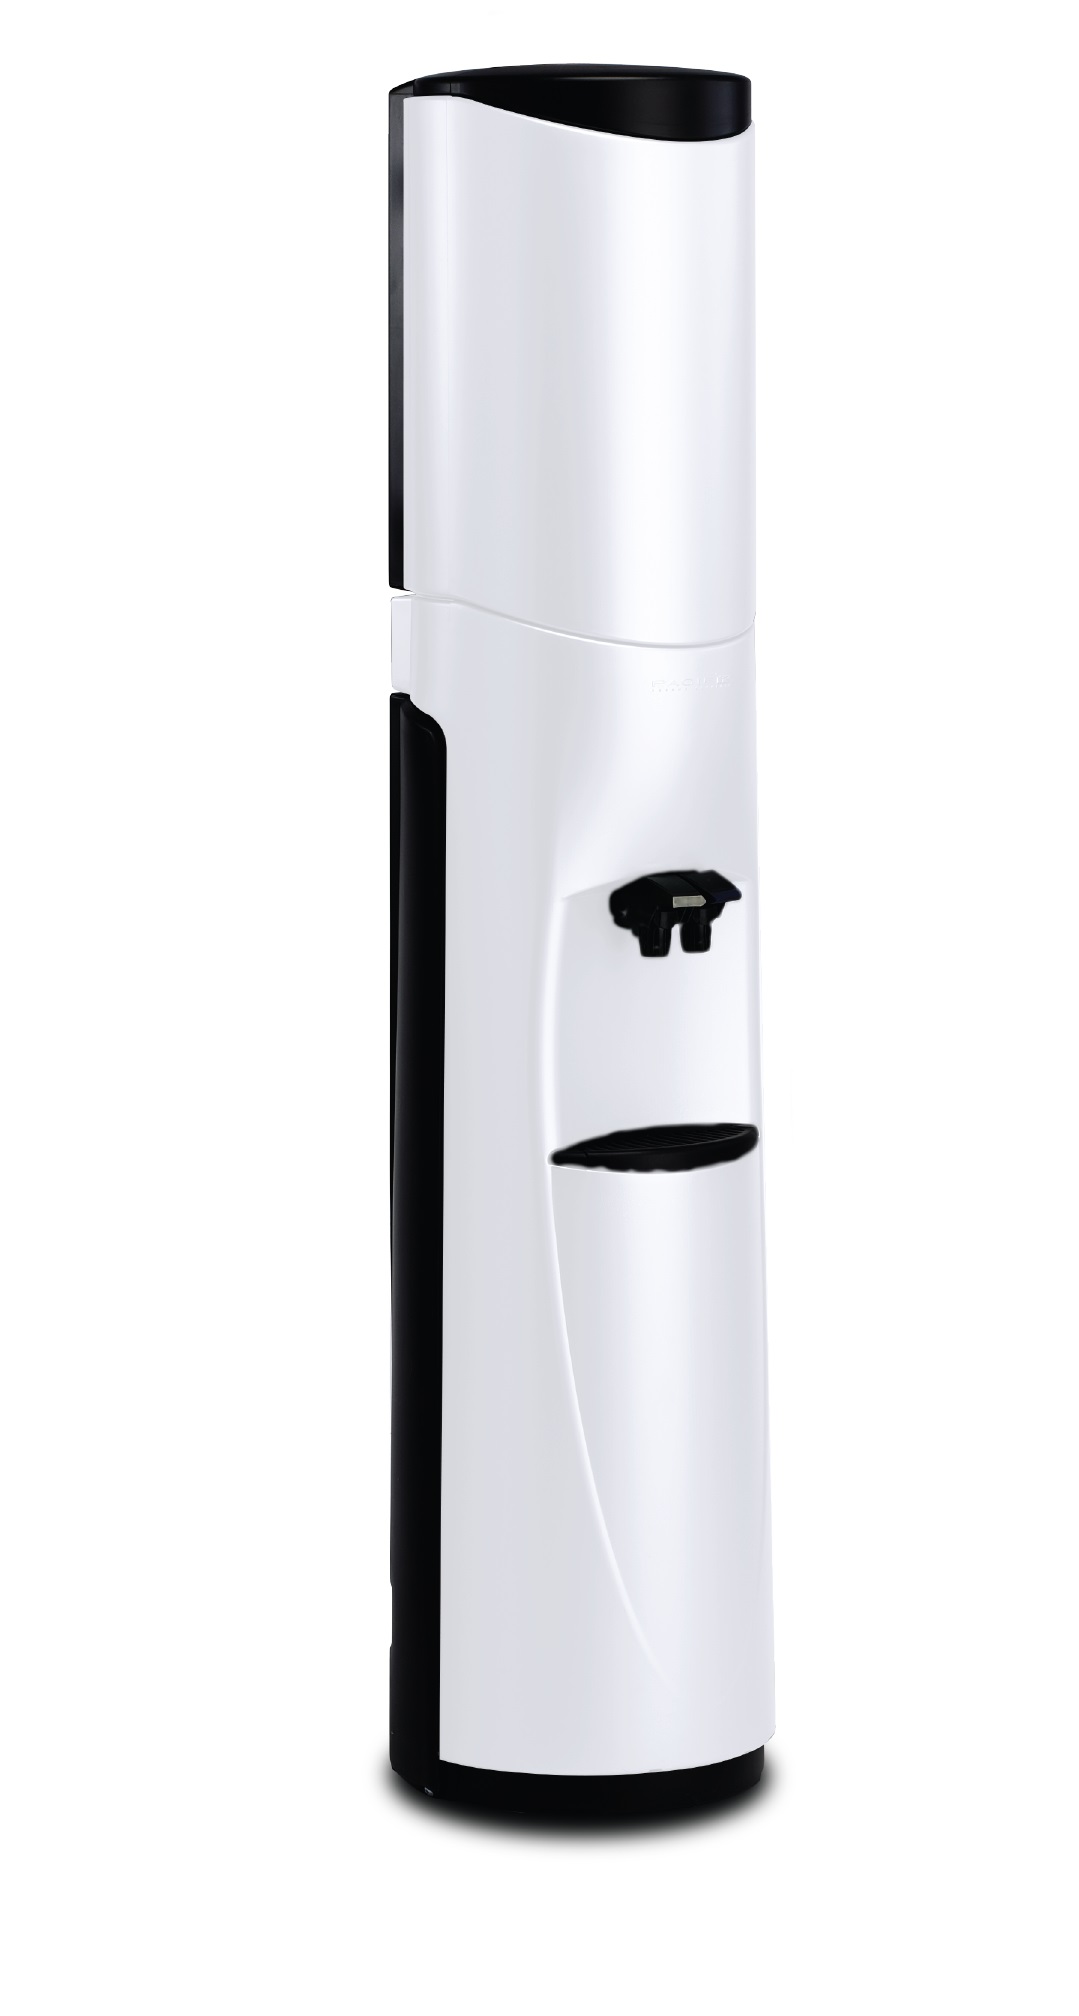 Pacifik High Tech Bottleless Water Cooler in White with Black Trim - Cold/Cold